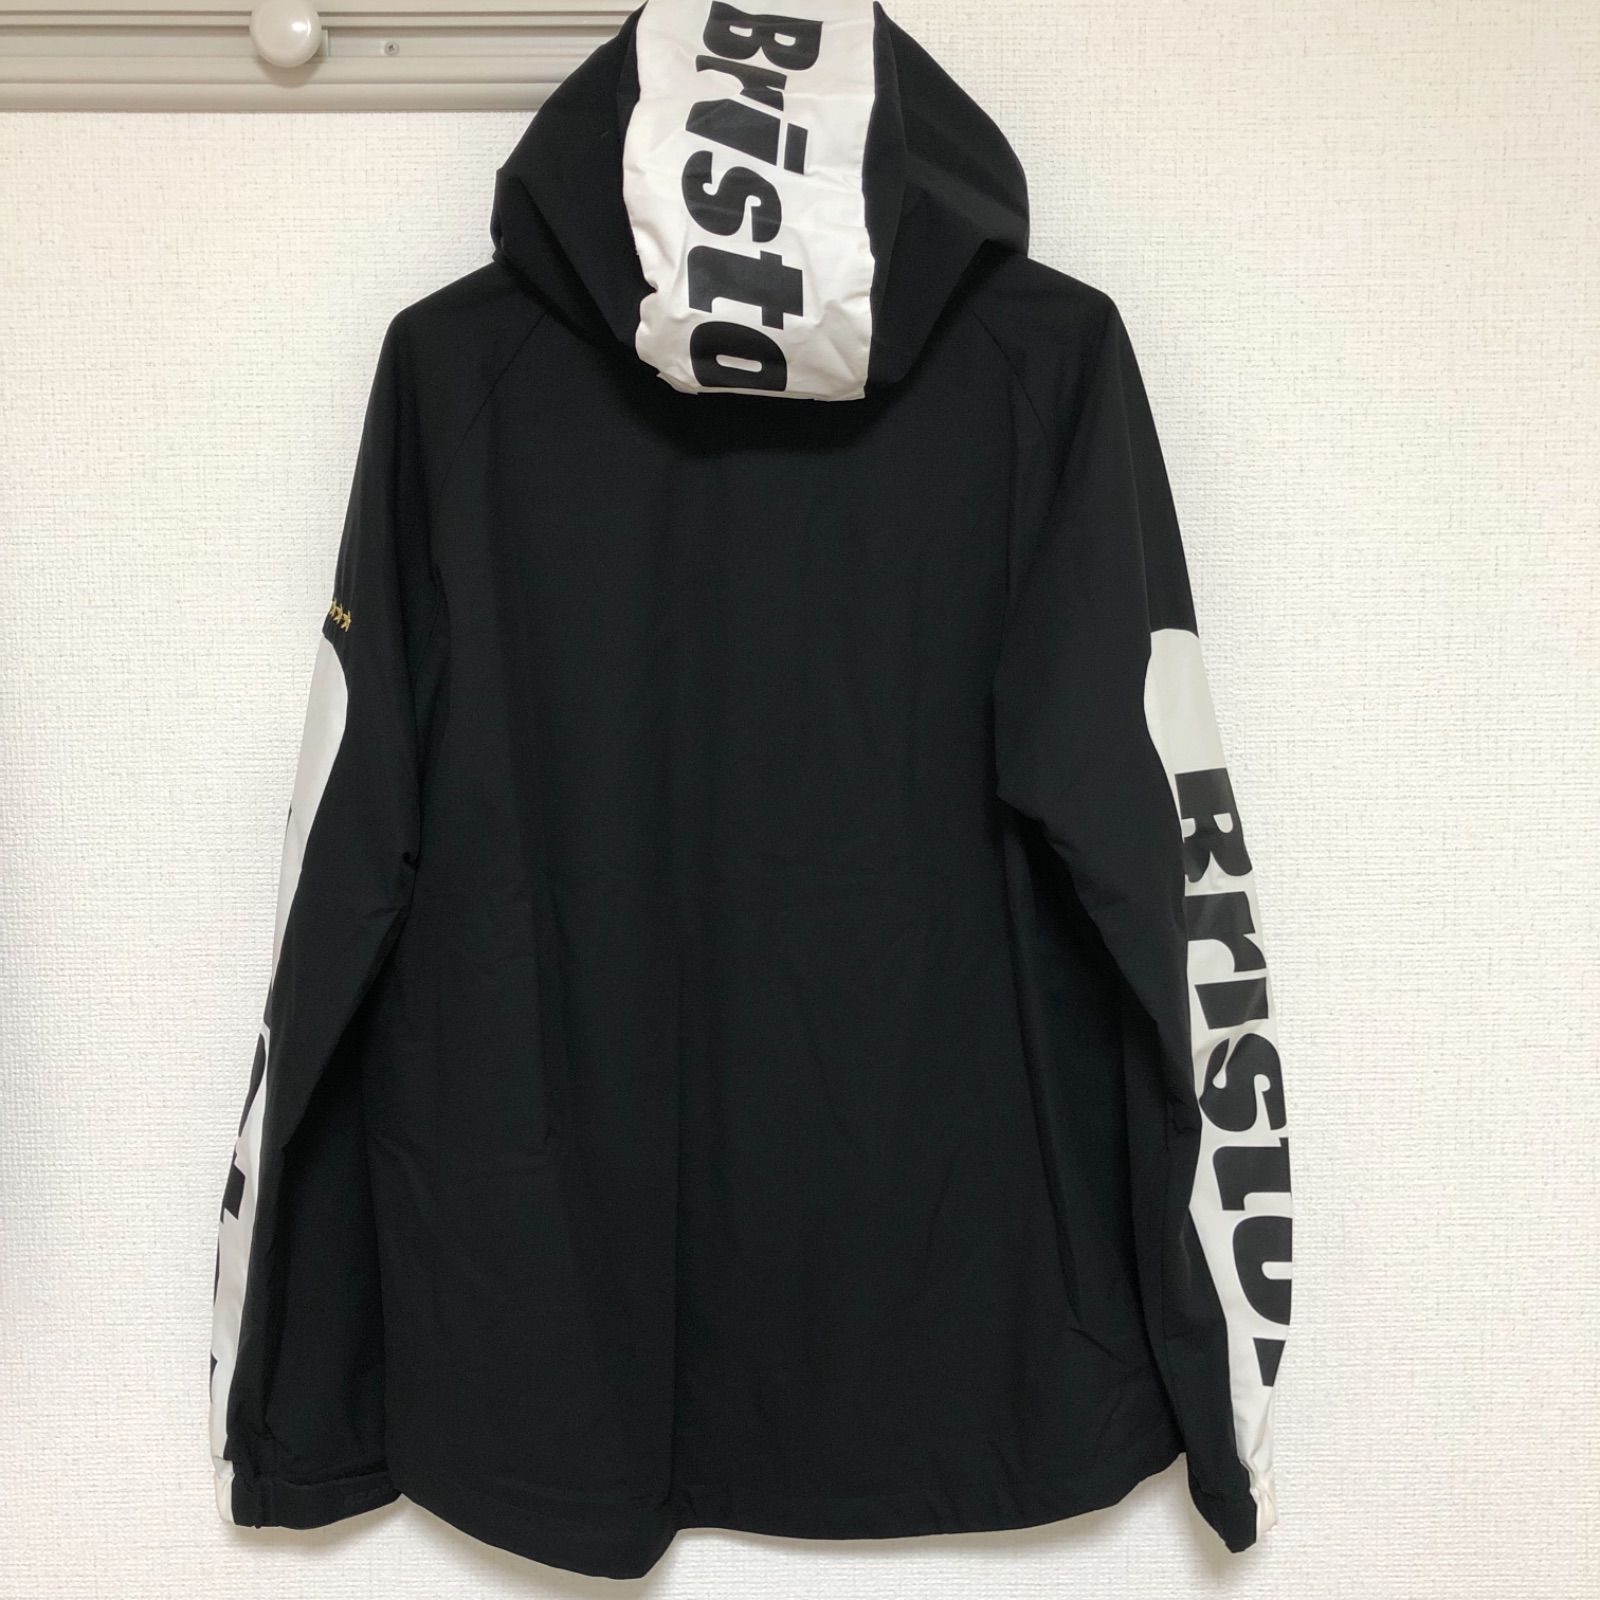 FCRB Bistol 2019 SS WARM UP JACKET L - Roooote'S(古着・雑貨